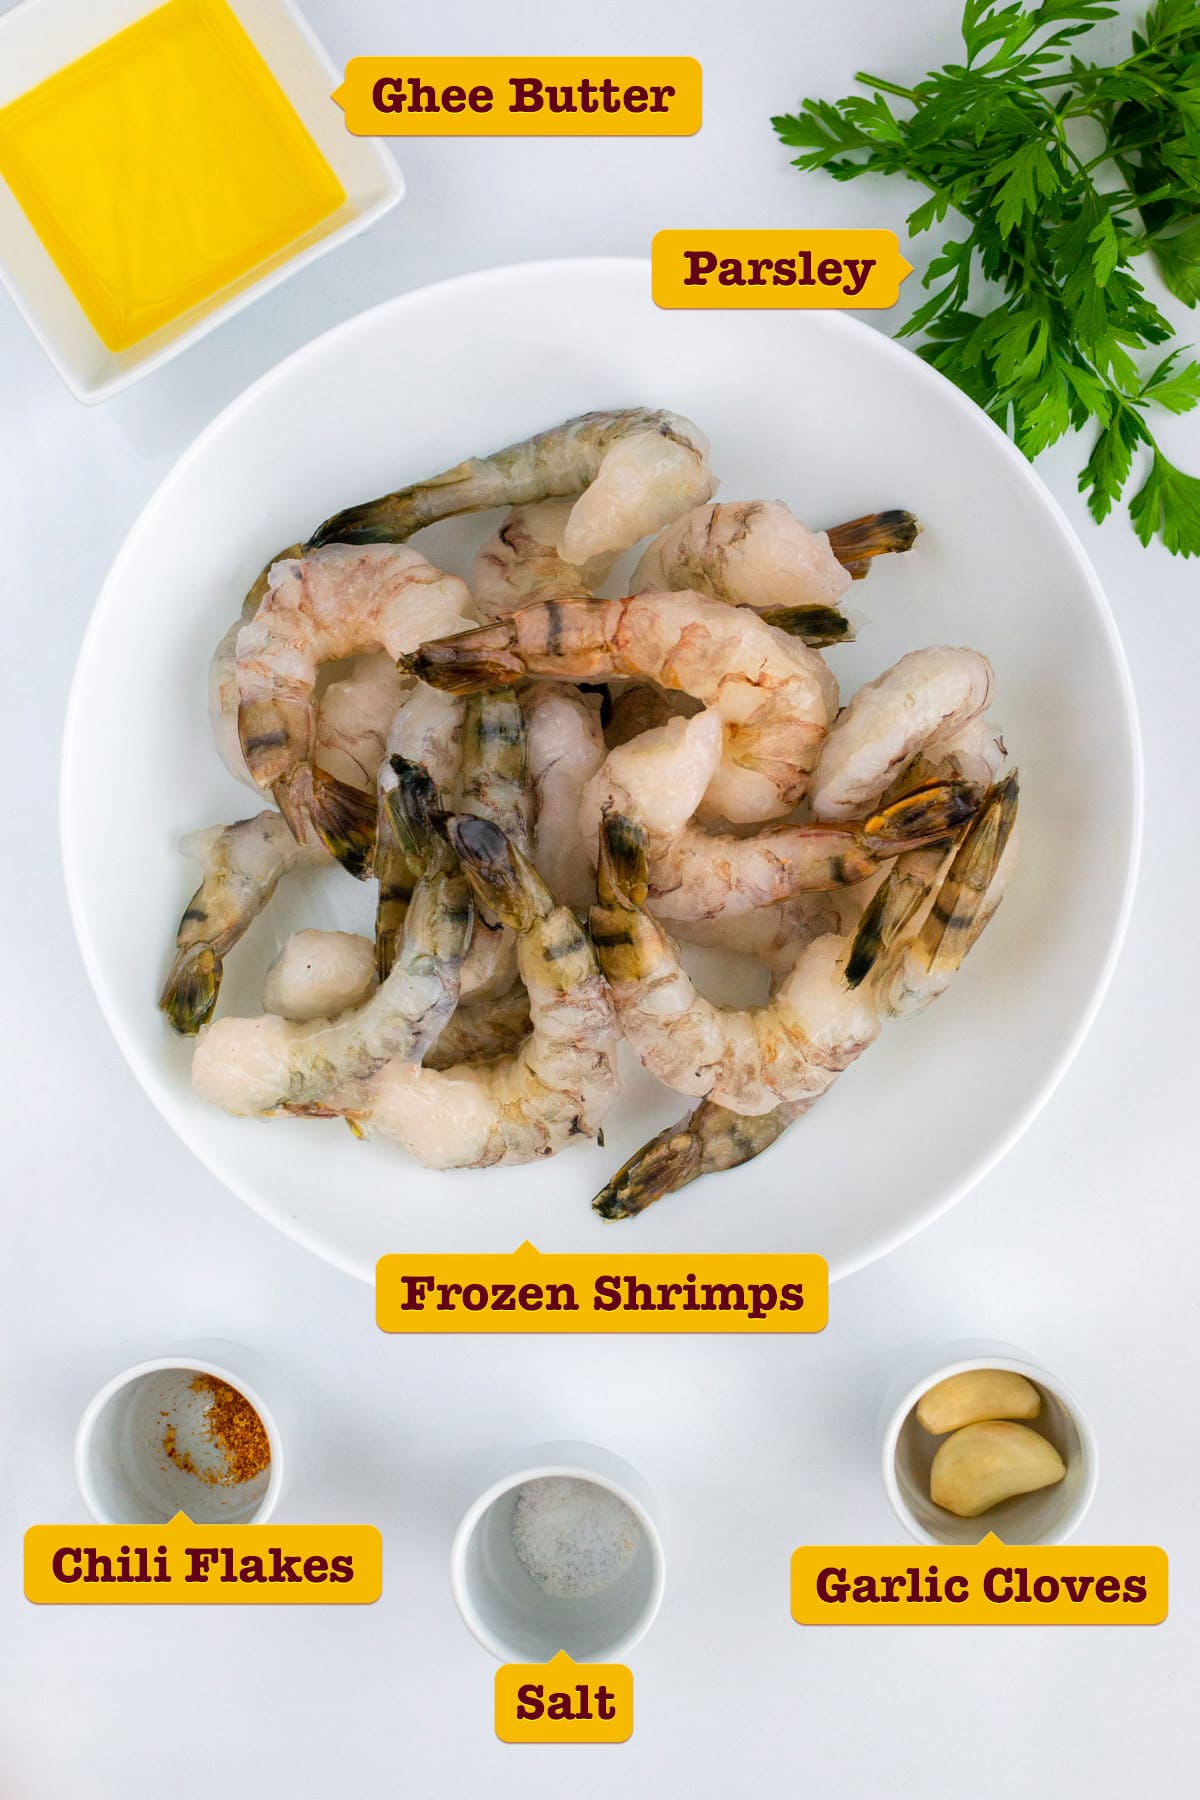 Frozen shrimps with chili flakes, garlic cloves, parsley and ghee butter.